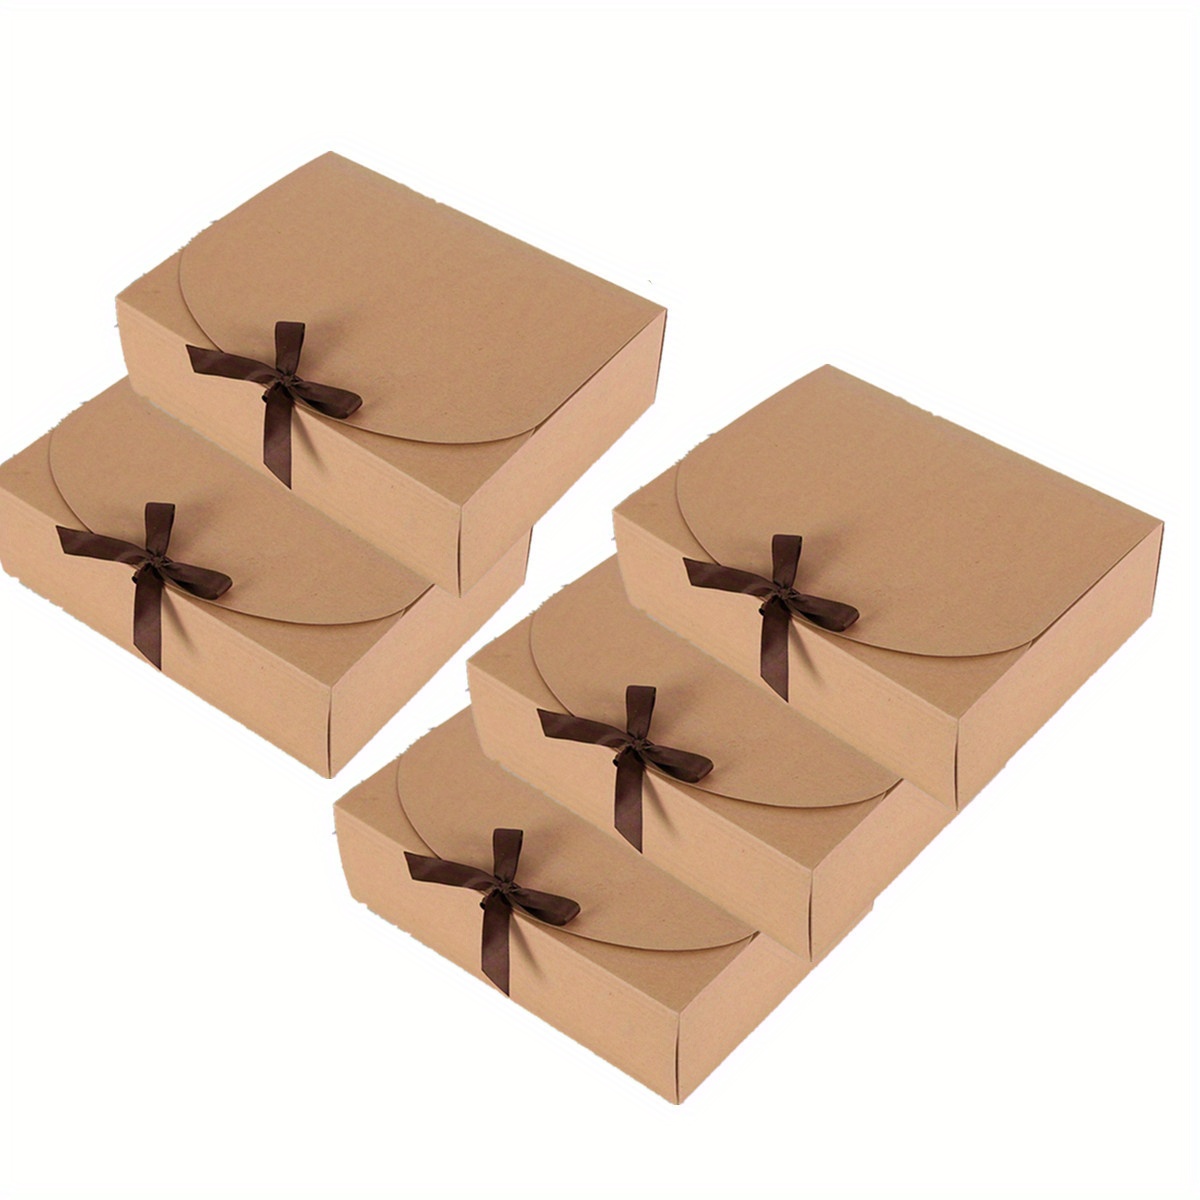 Bow Maker® — Rich Plus Gift Wrapping Paper Wholesale